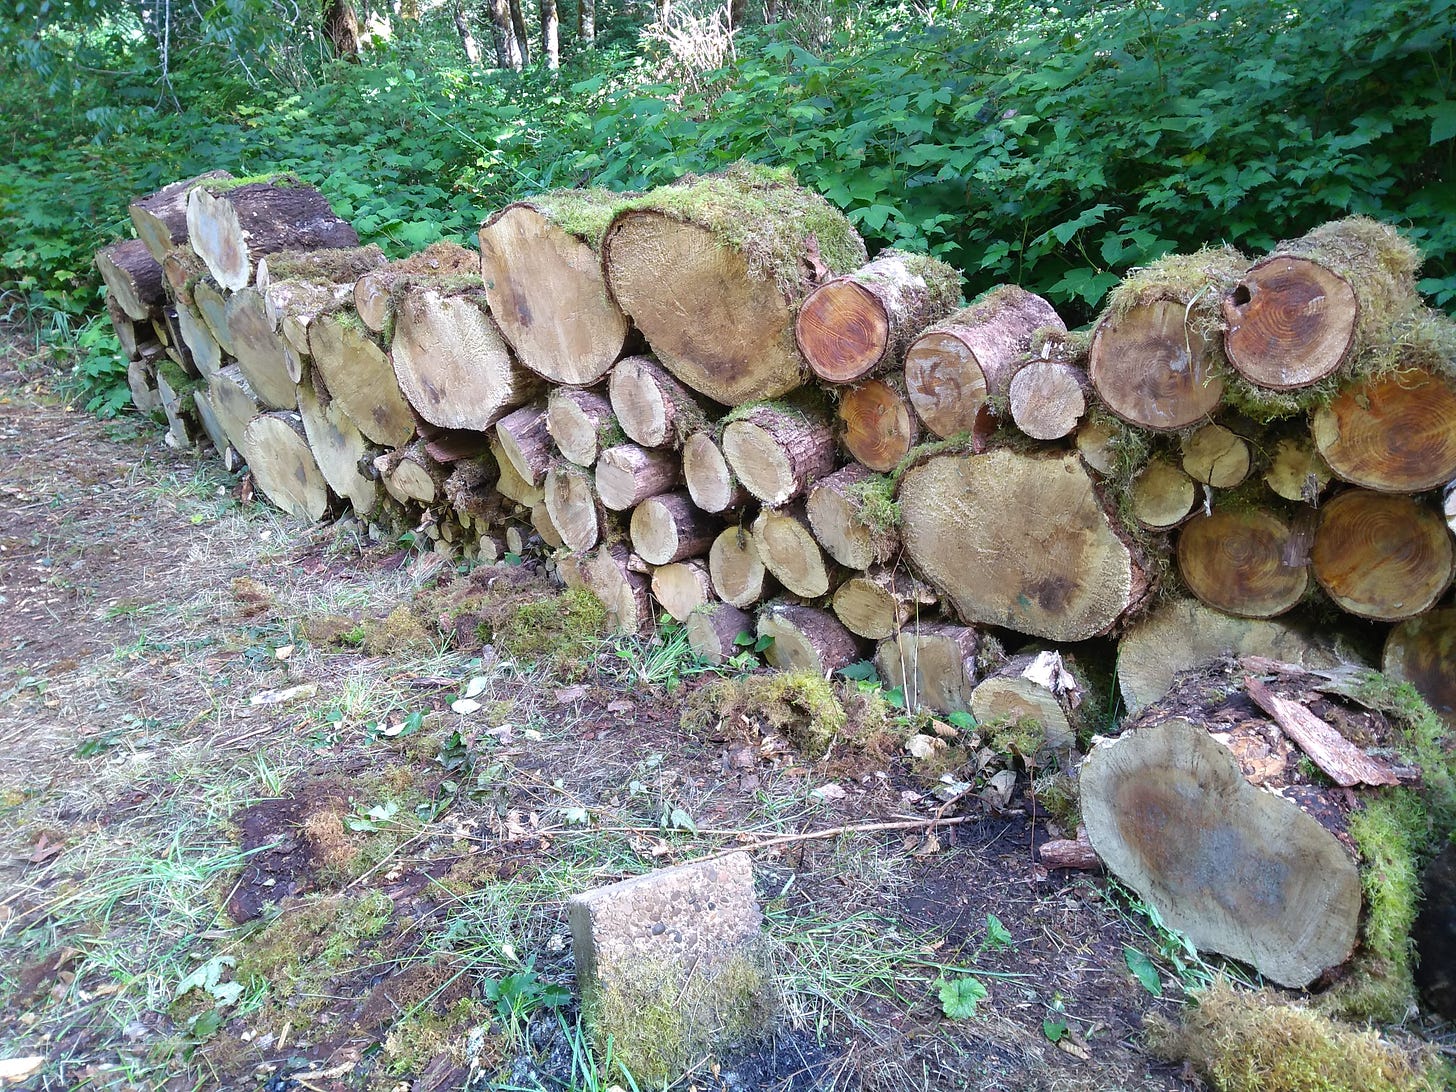 A long stack of cut logs, some of them 18 inches across.